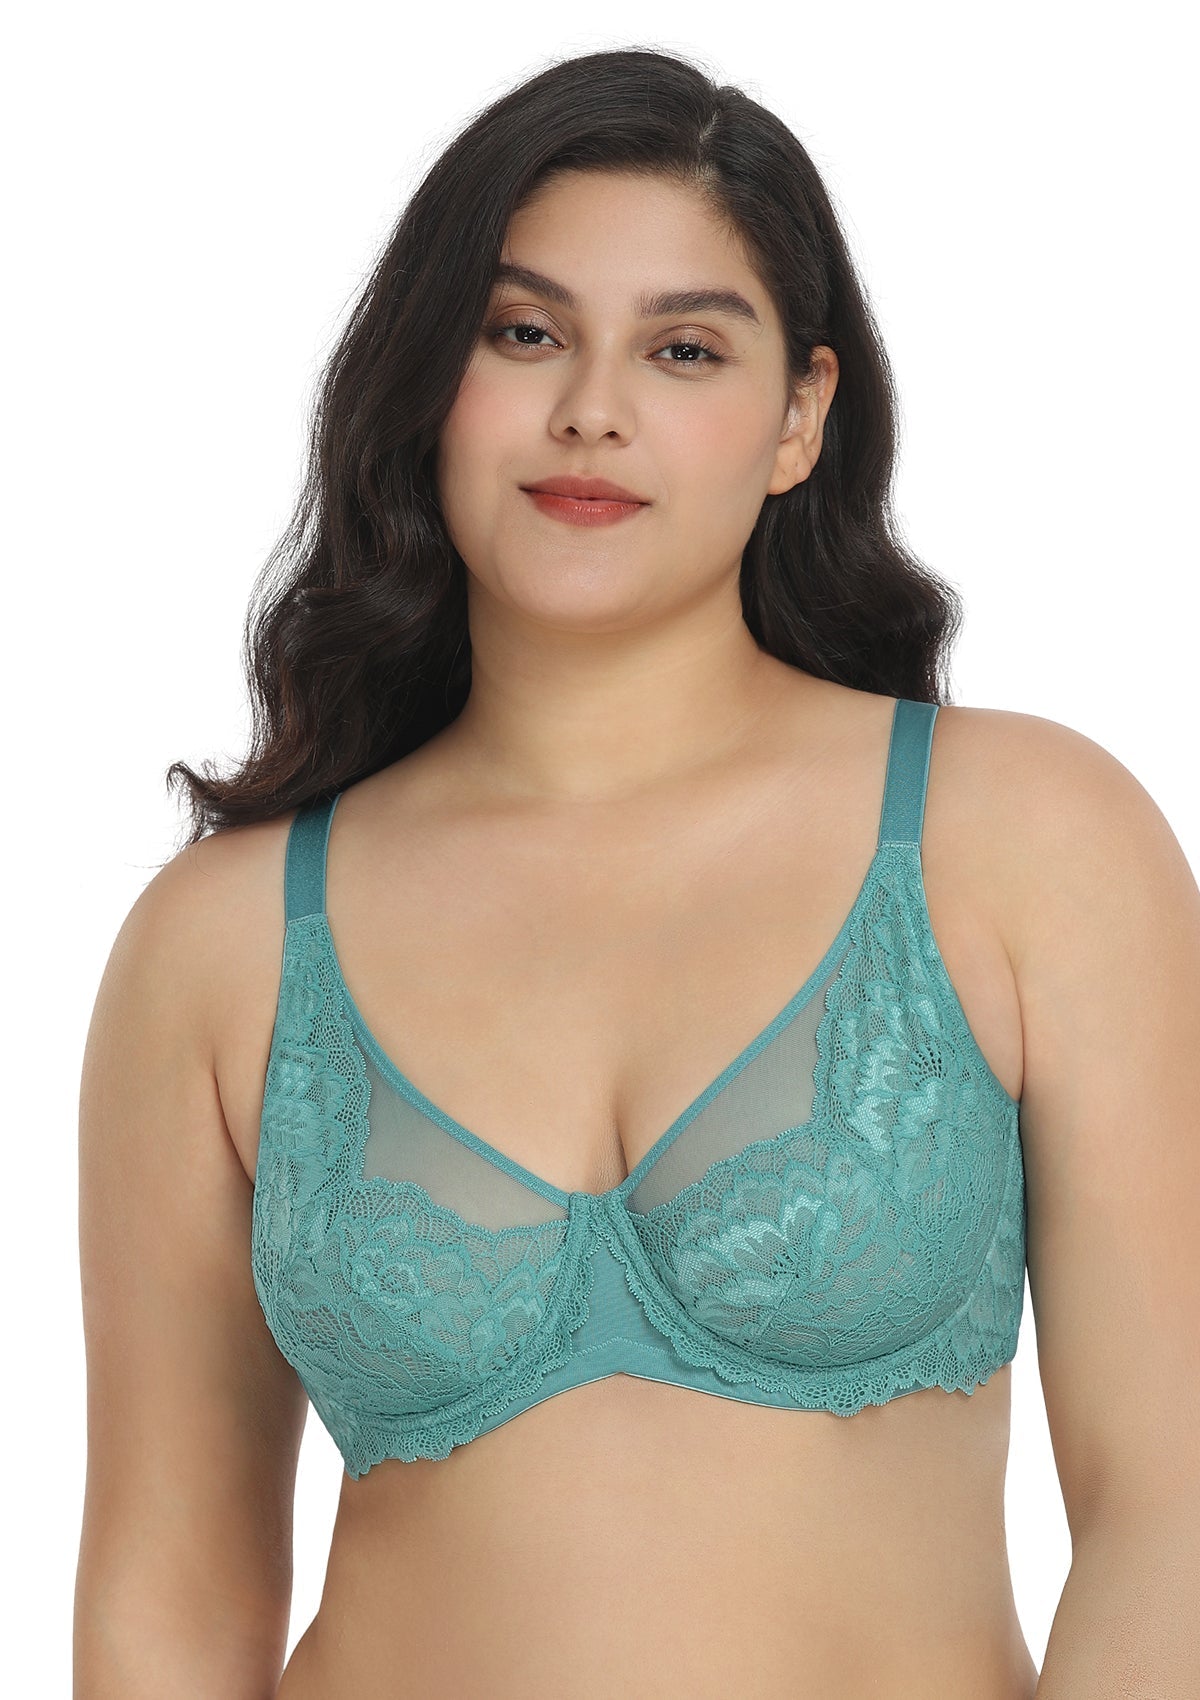 HSIA Paeonia Lace Full Coverage Underwire Non-Padded Uplifting Bra - Purple / 34 / D